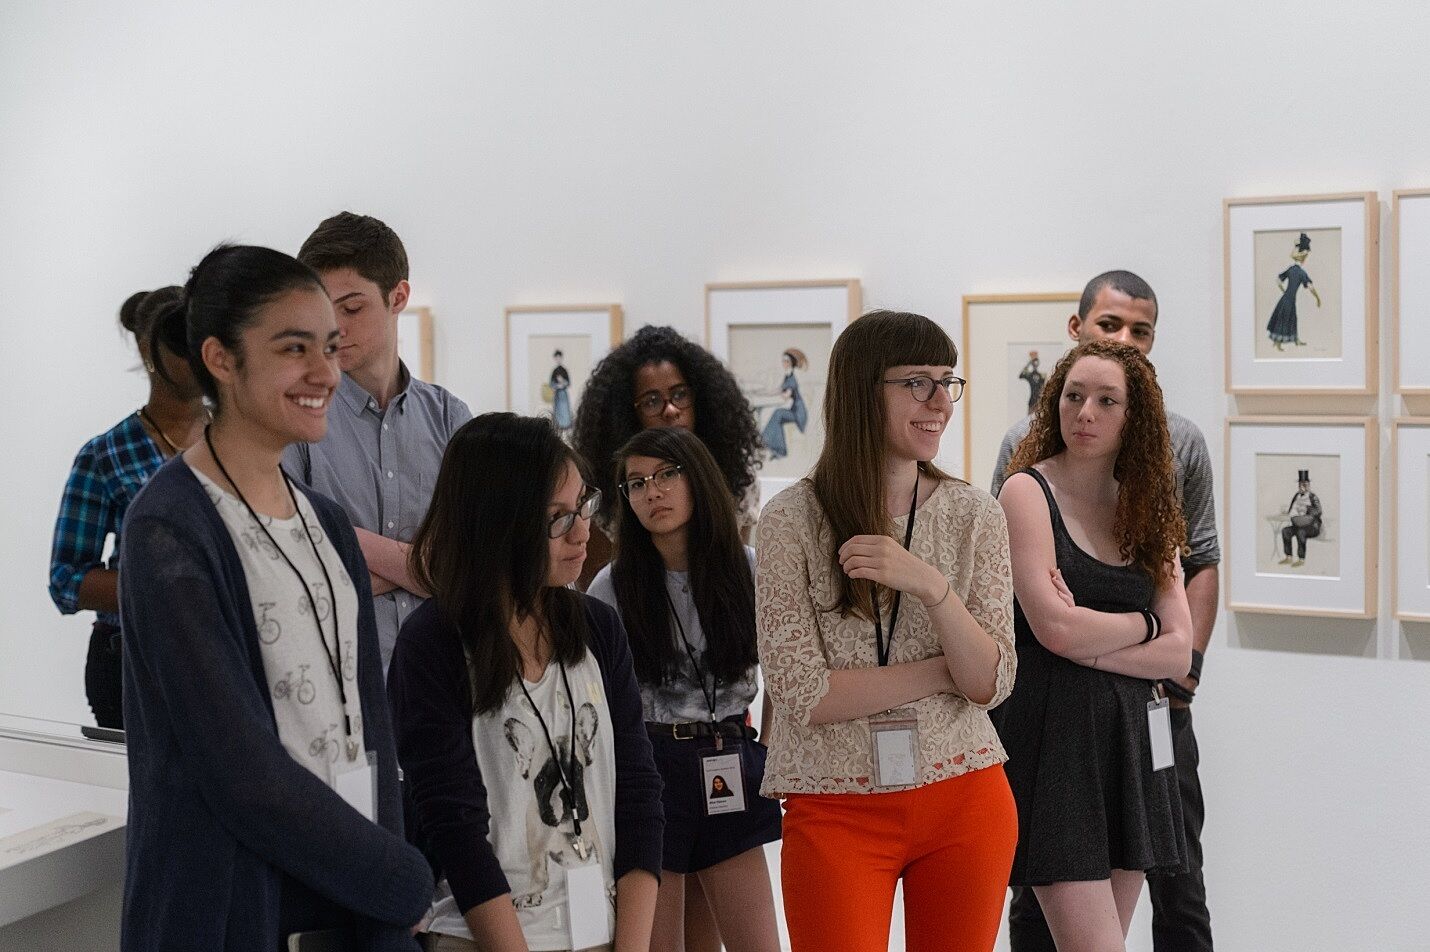 A group of teens stands in the gallery of the Edward Hopper exhibit.